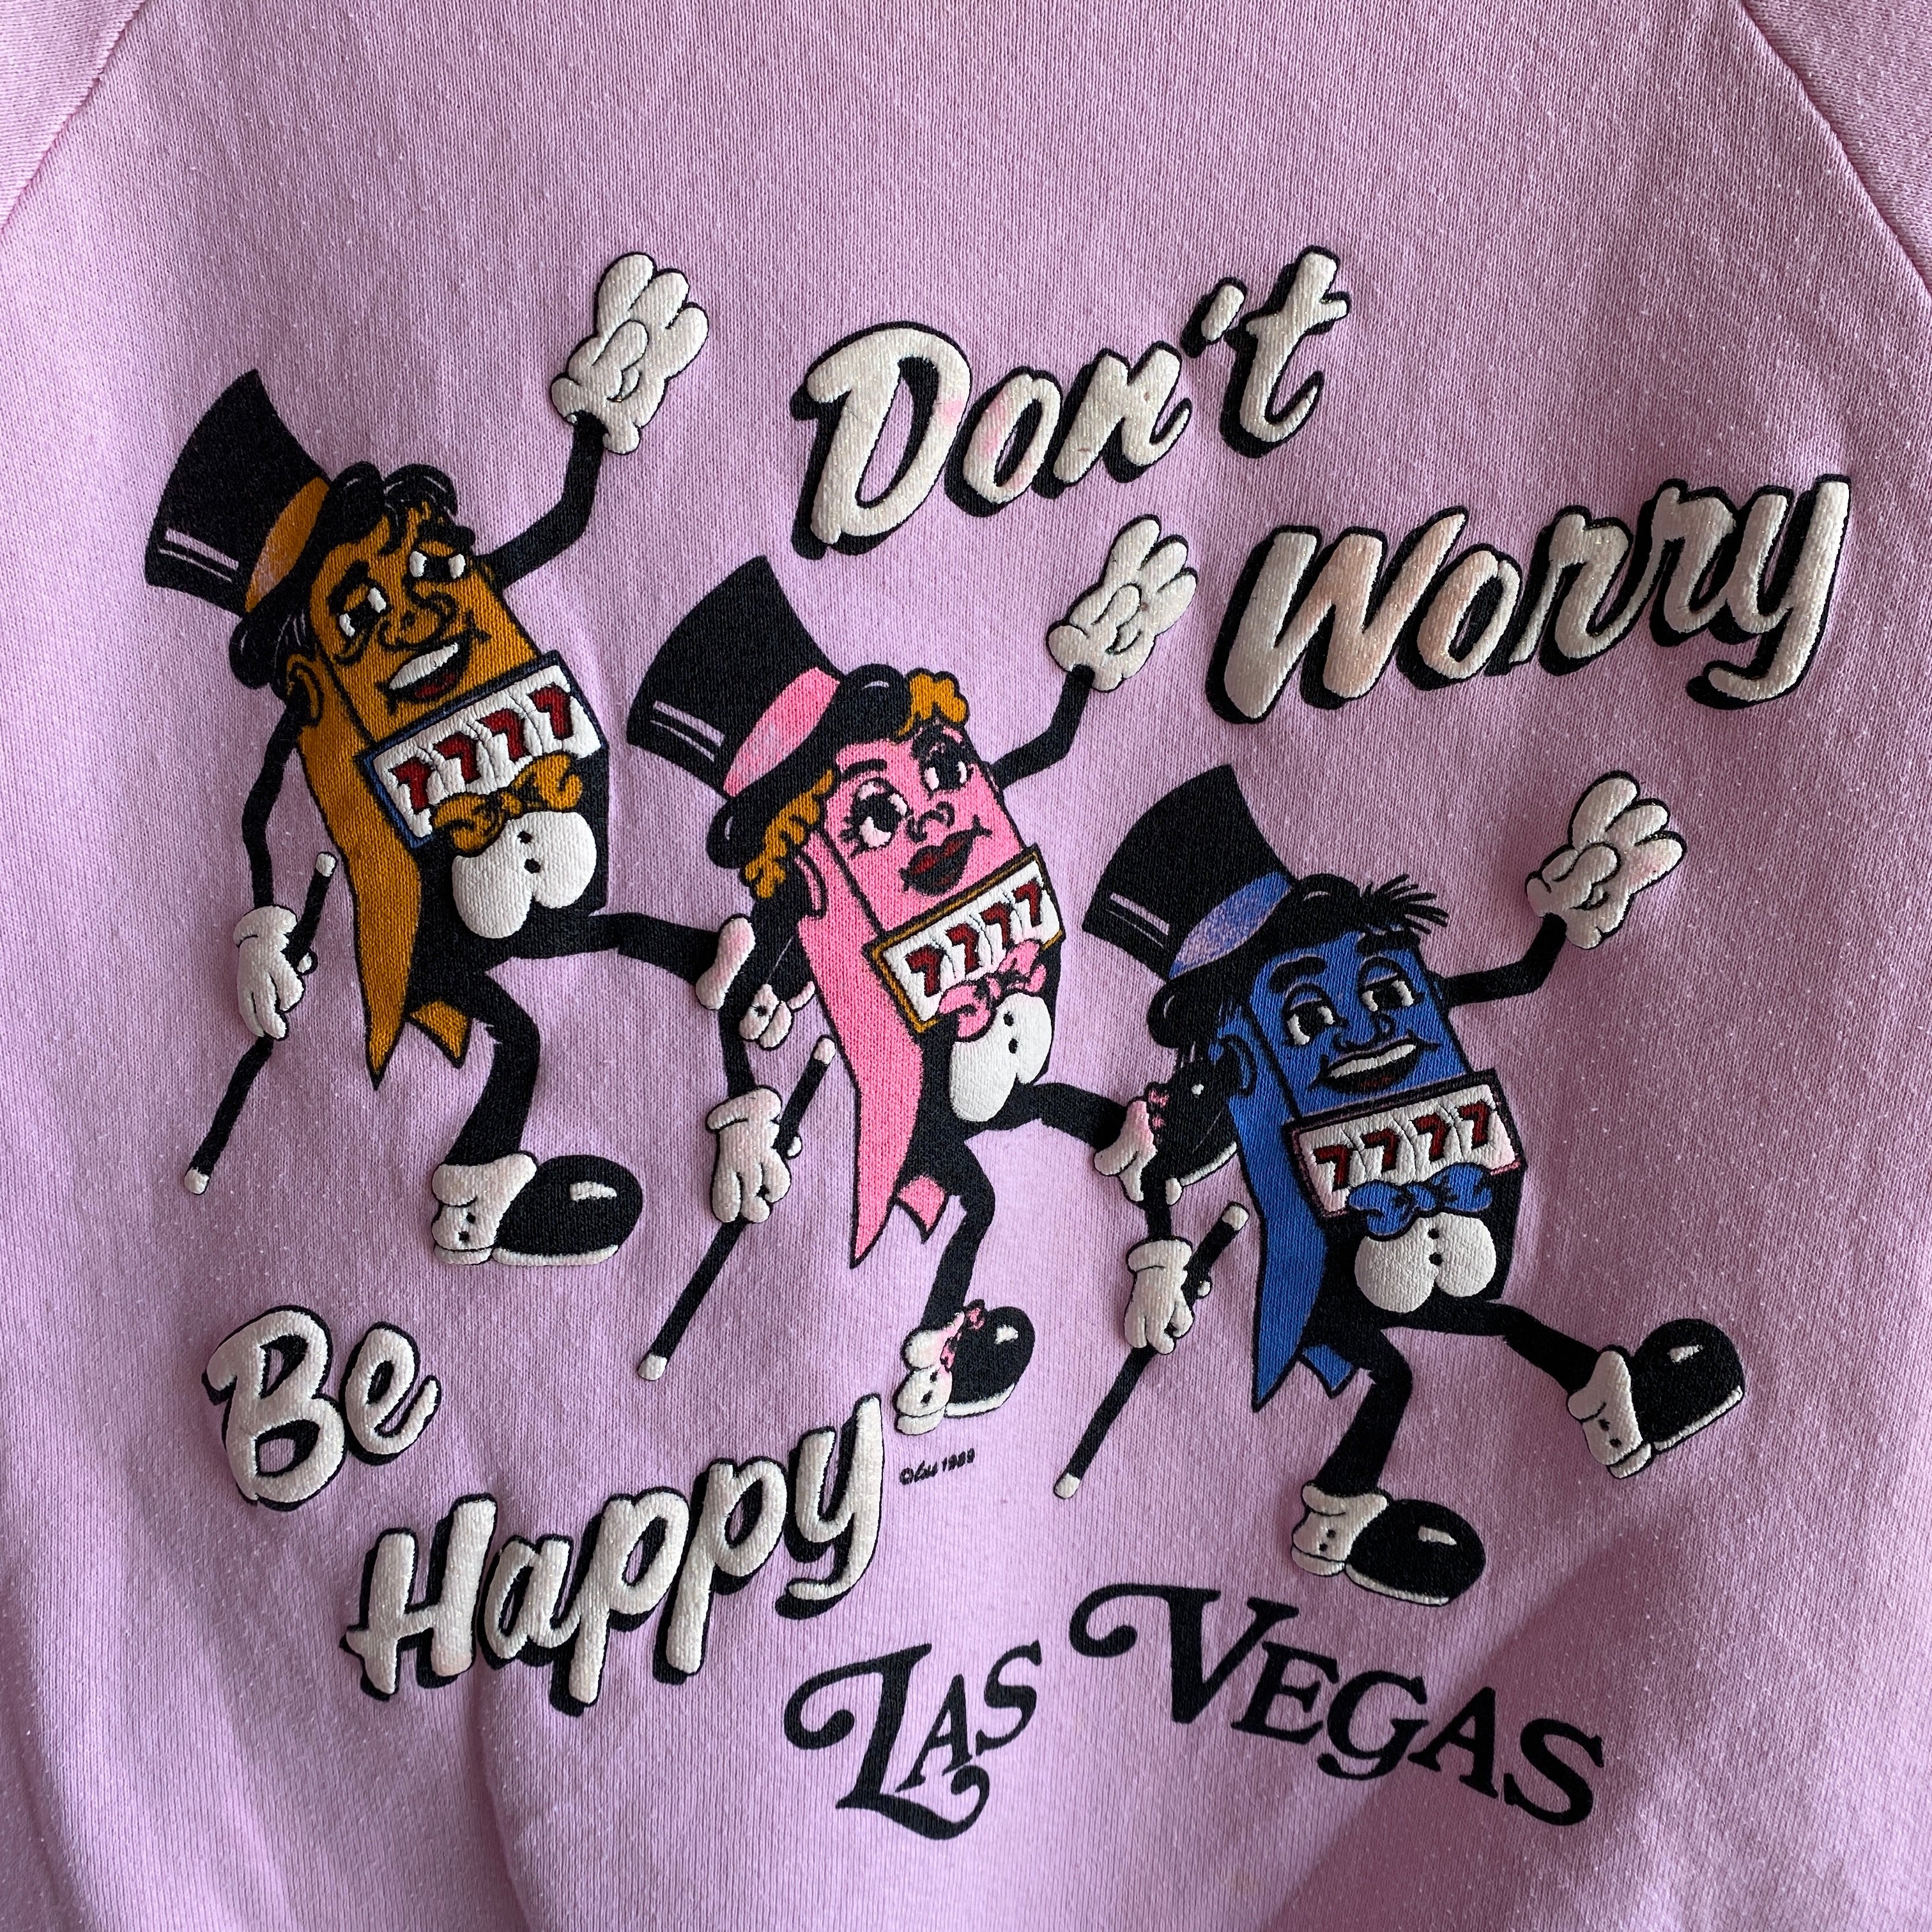 1989 Don't Worry, Be Happy - Las Vegas - YES!!